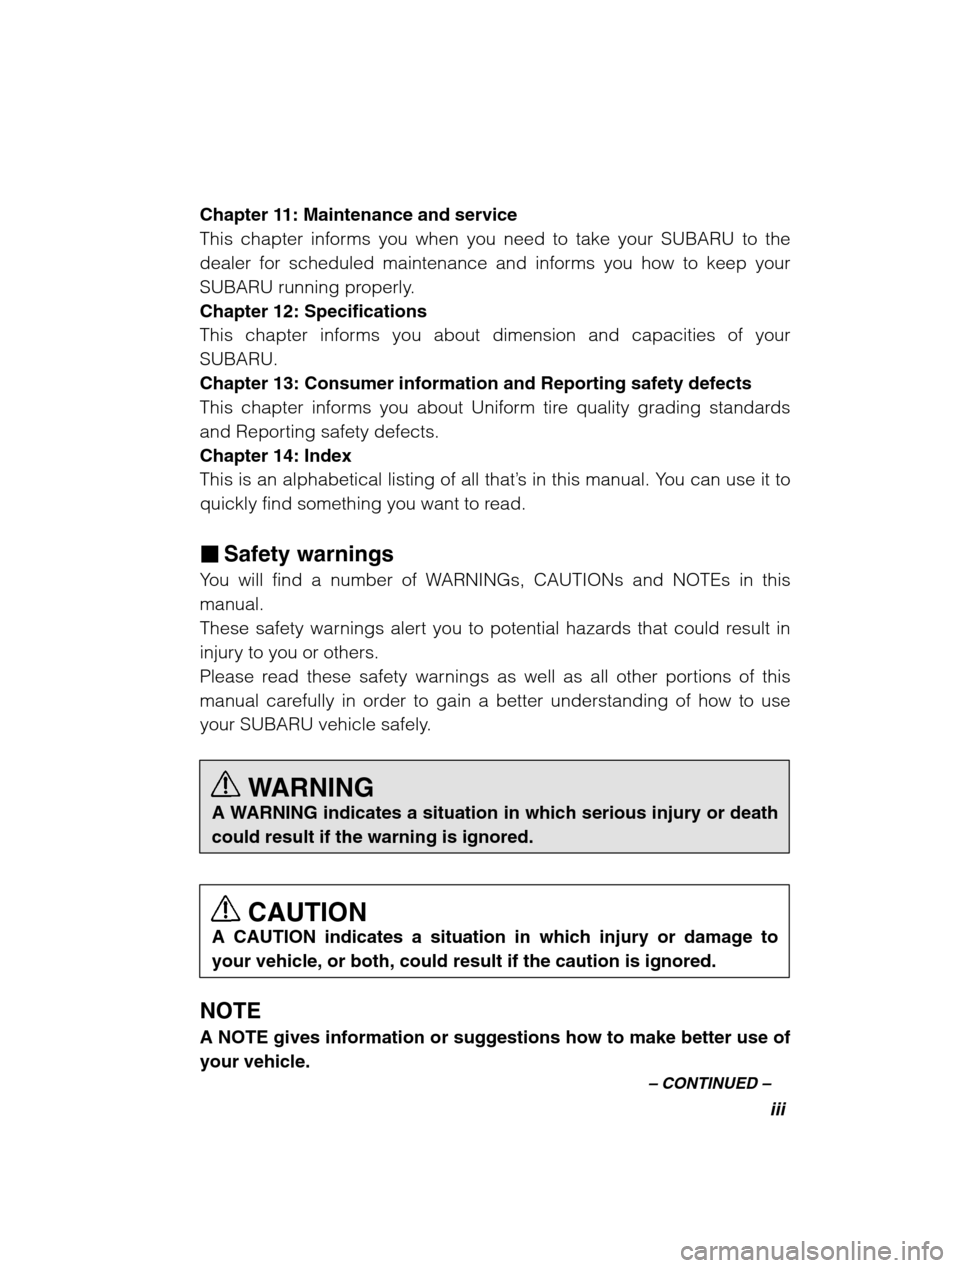 SUBARU FORESTER 2002 SG / 2.G Owners Manual iii
–
 CONTINUED  –
Chapter 11: Maintenance and service 
This chapter informs you when you need to take your SUBARU to the
dealer for scheduled maintenance and informs you how to keep your
SUBARU 